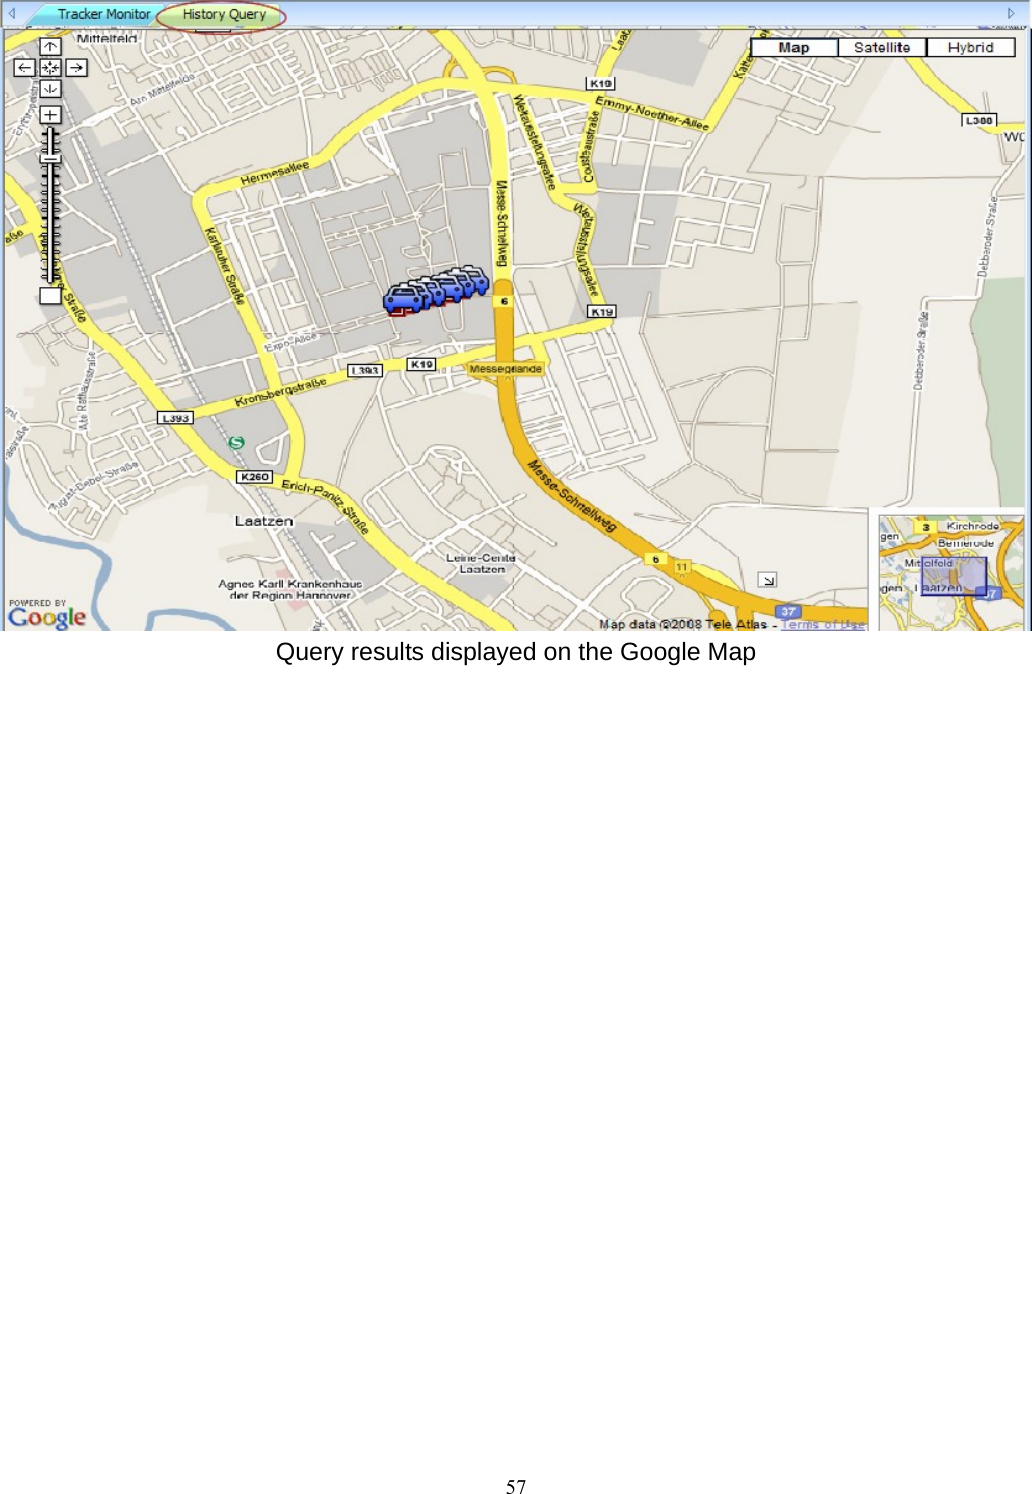  Query results displayed on the Google Map  57